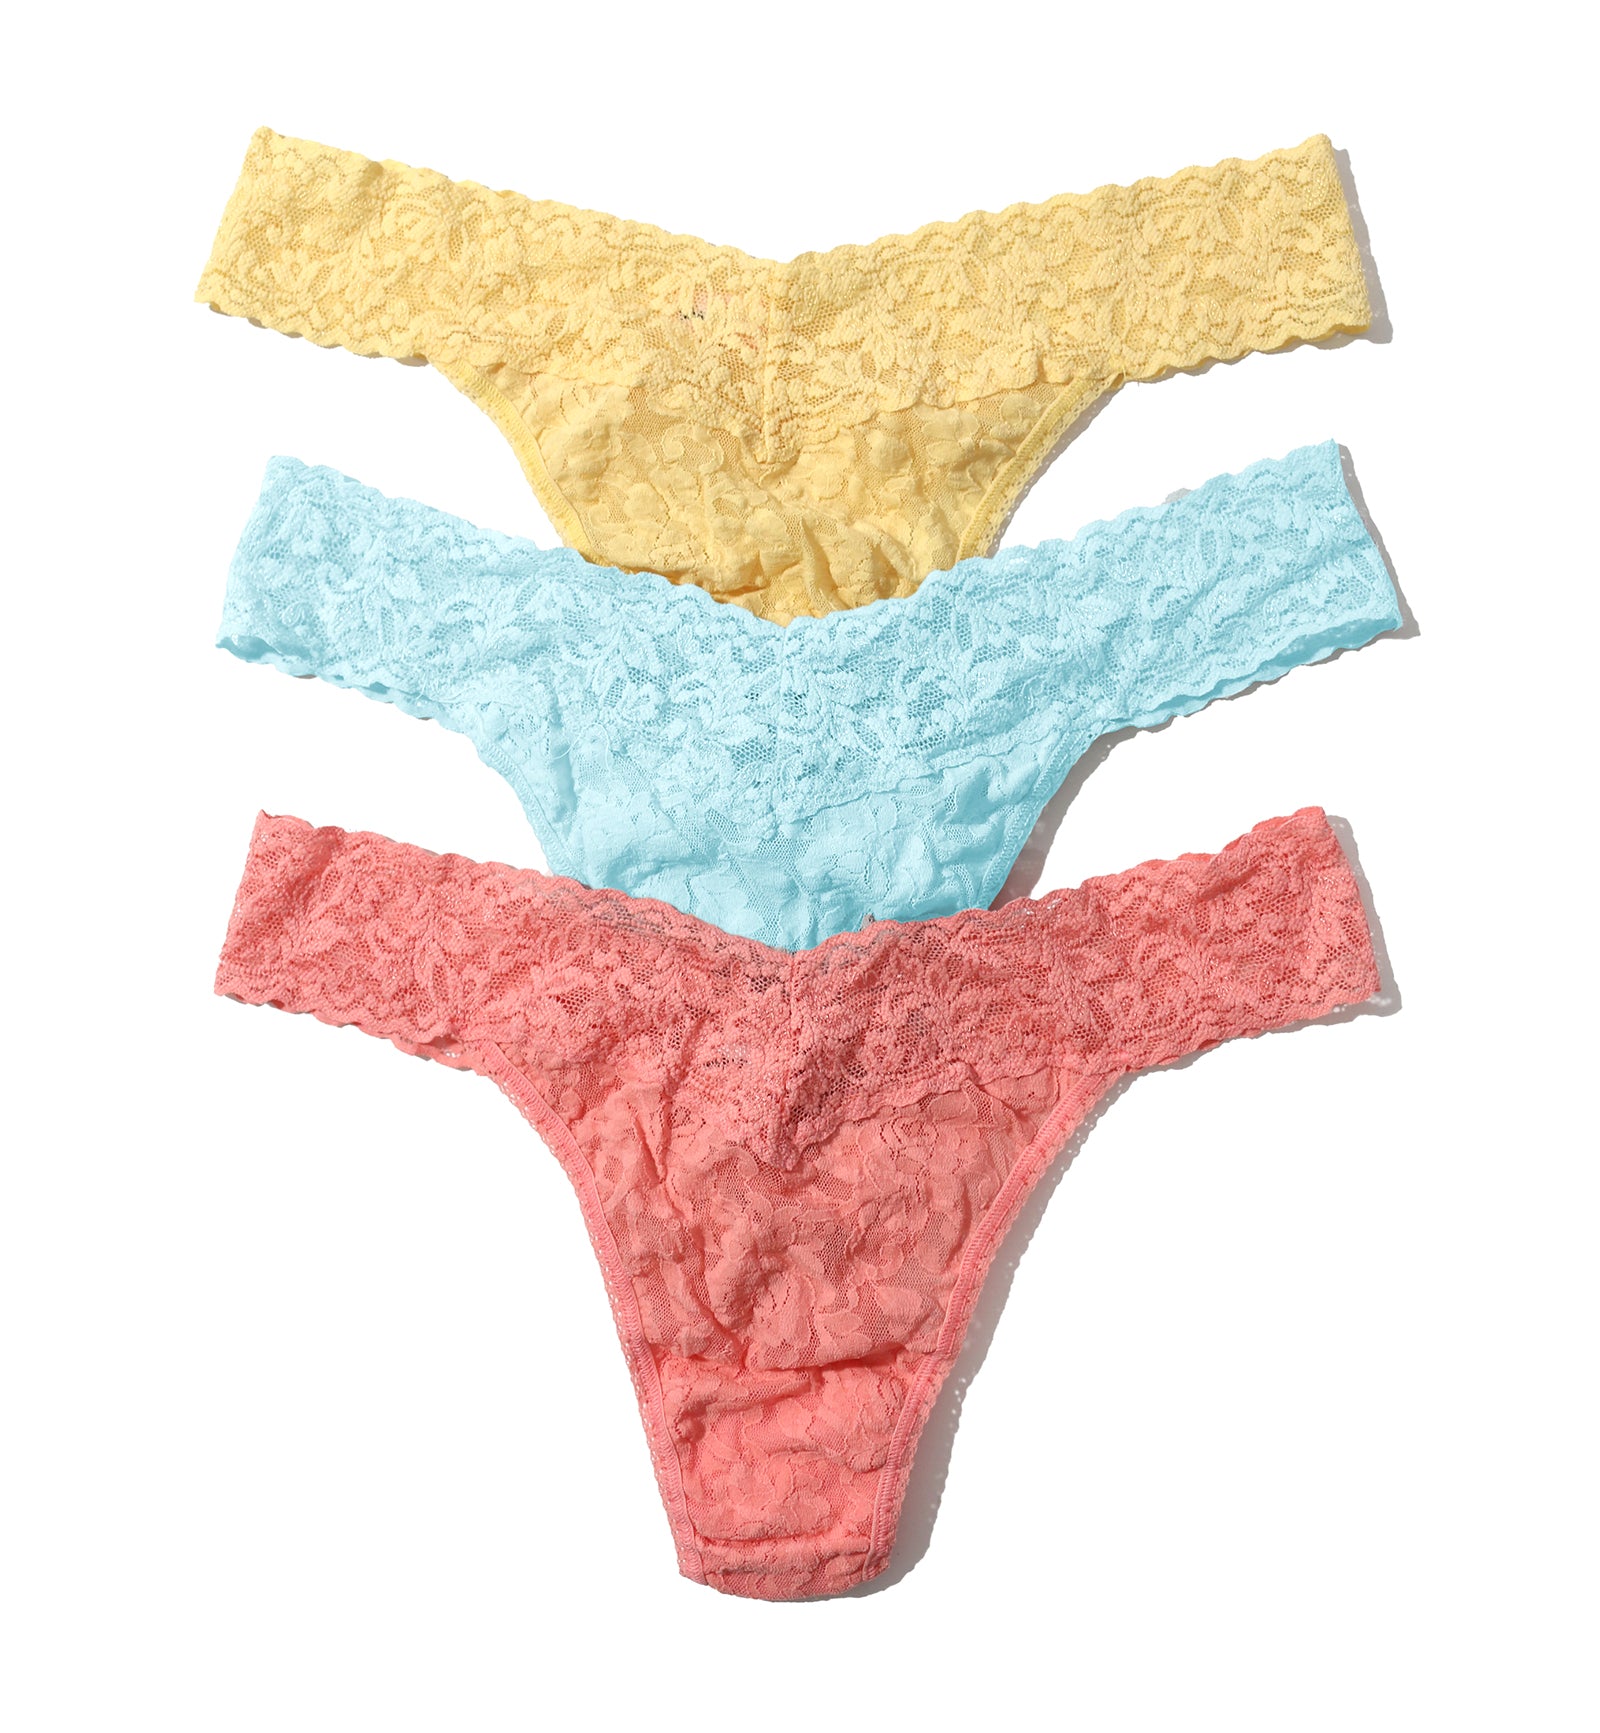 Hanky Panky 3-PACK Signature Lace Original Rise Thong PLUS (48113XPK),Cannes You Believe It - Cannes You Believe It,One Size